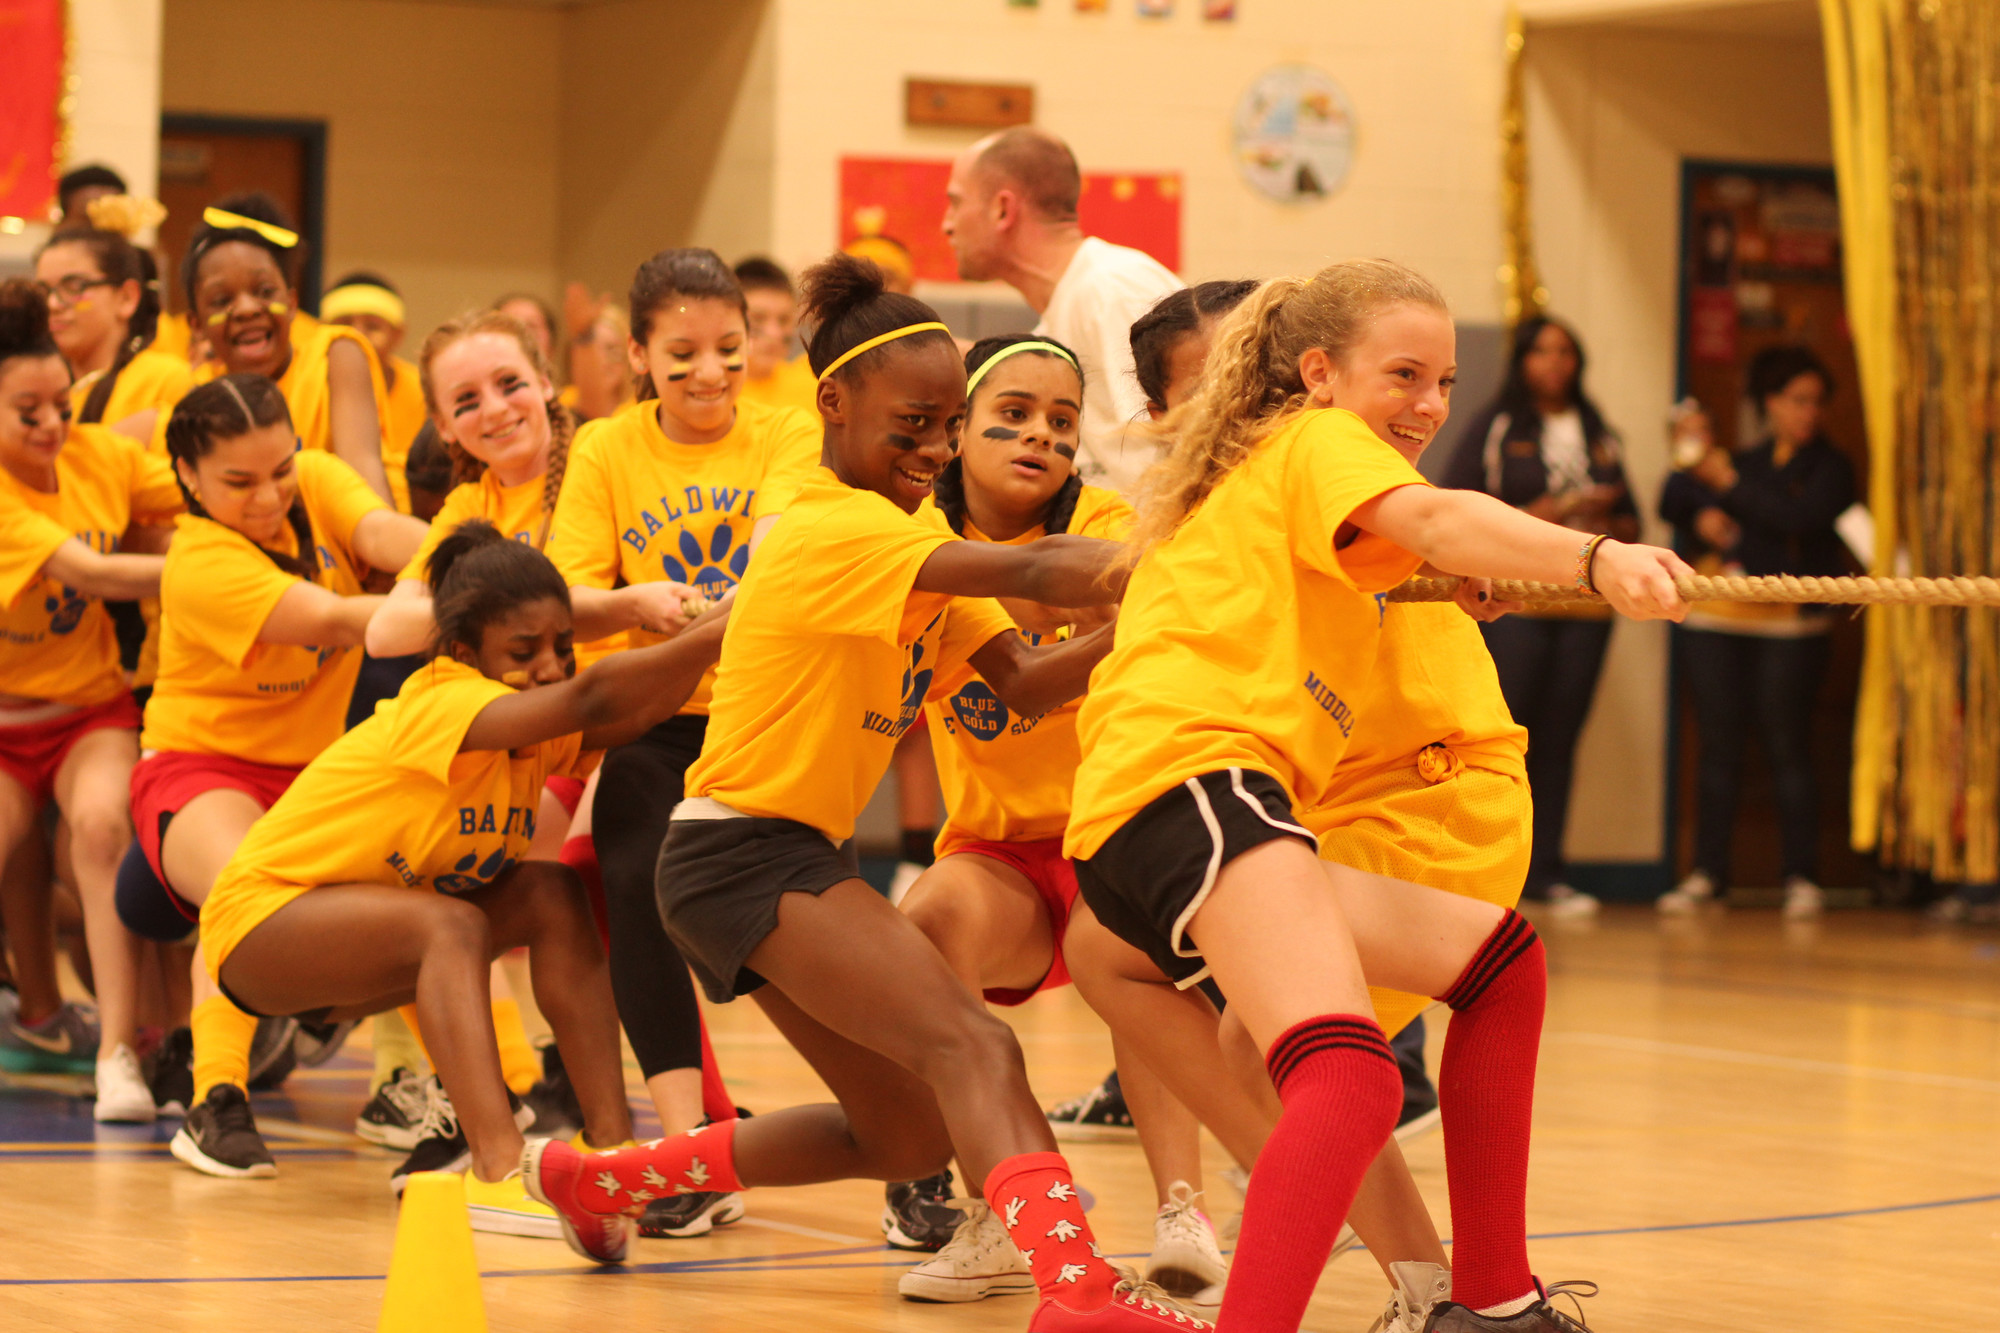 The Gold Team gave it their all in the tug-of-war competition. About 150 eighth graders participated in the annual event.